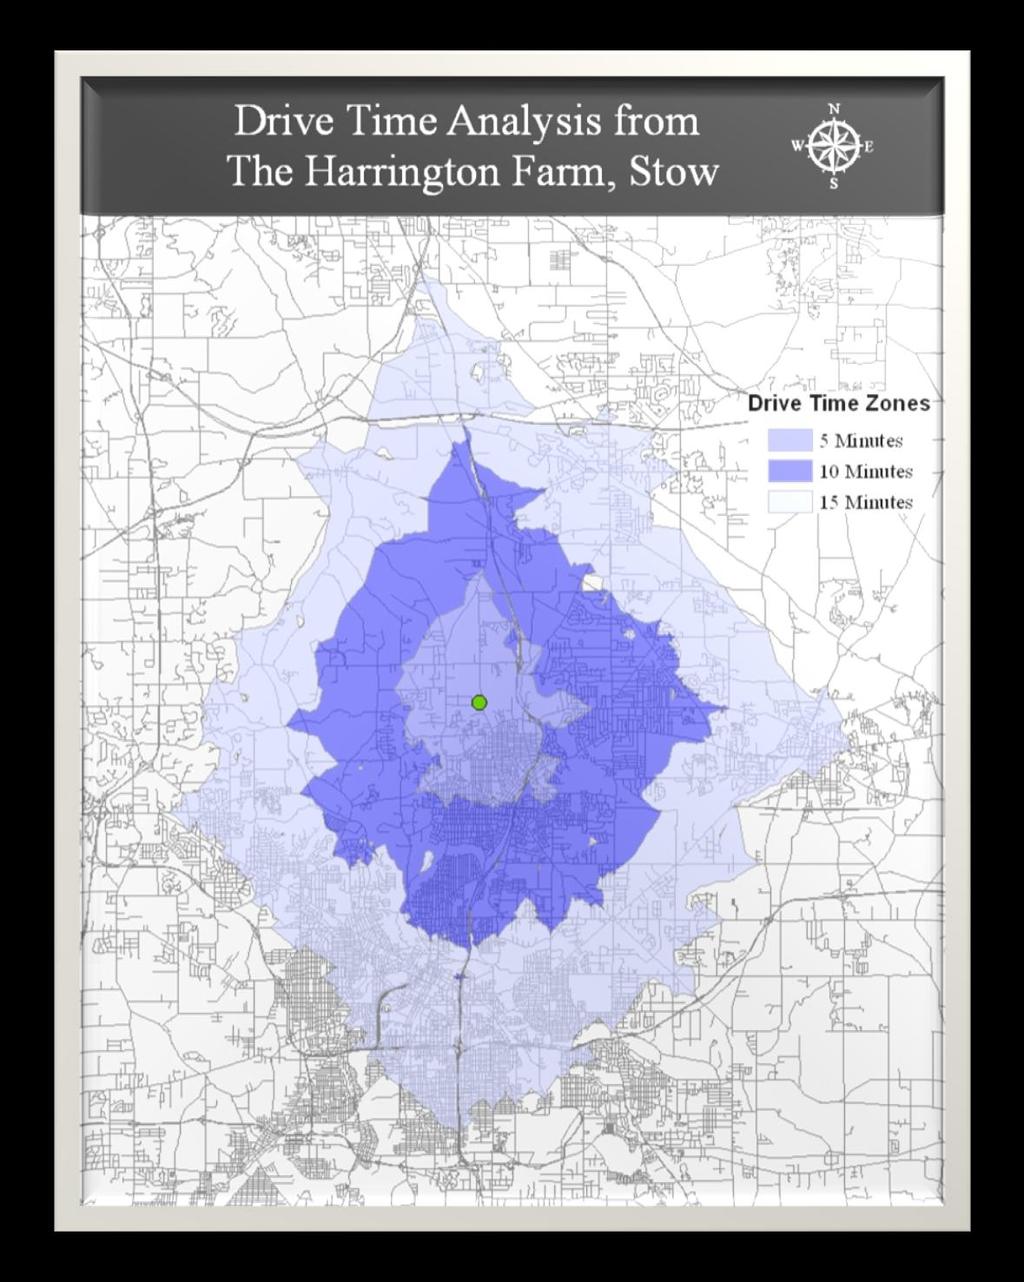 Harrington Farm site is within 5 minutes of Route